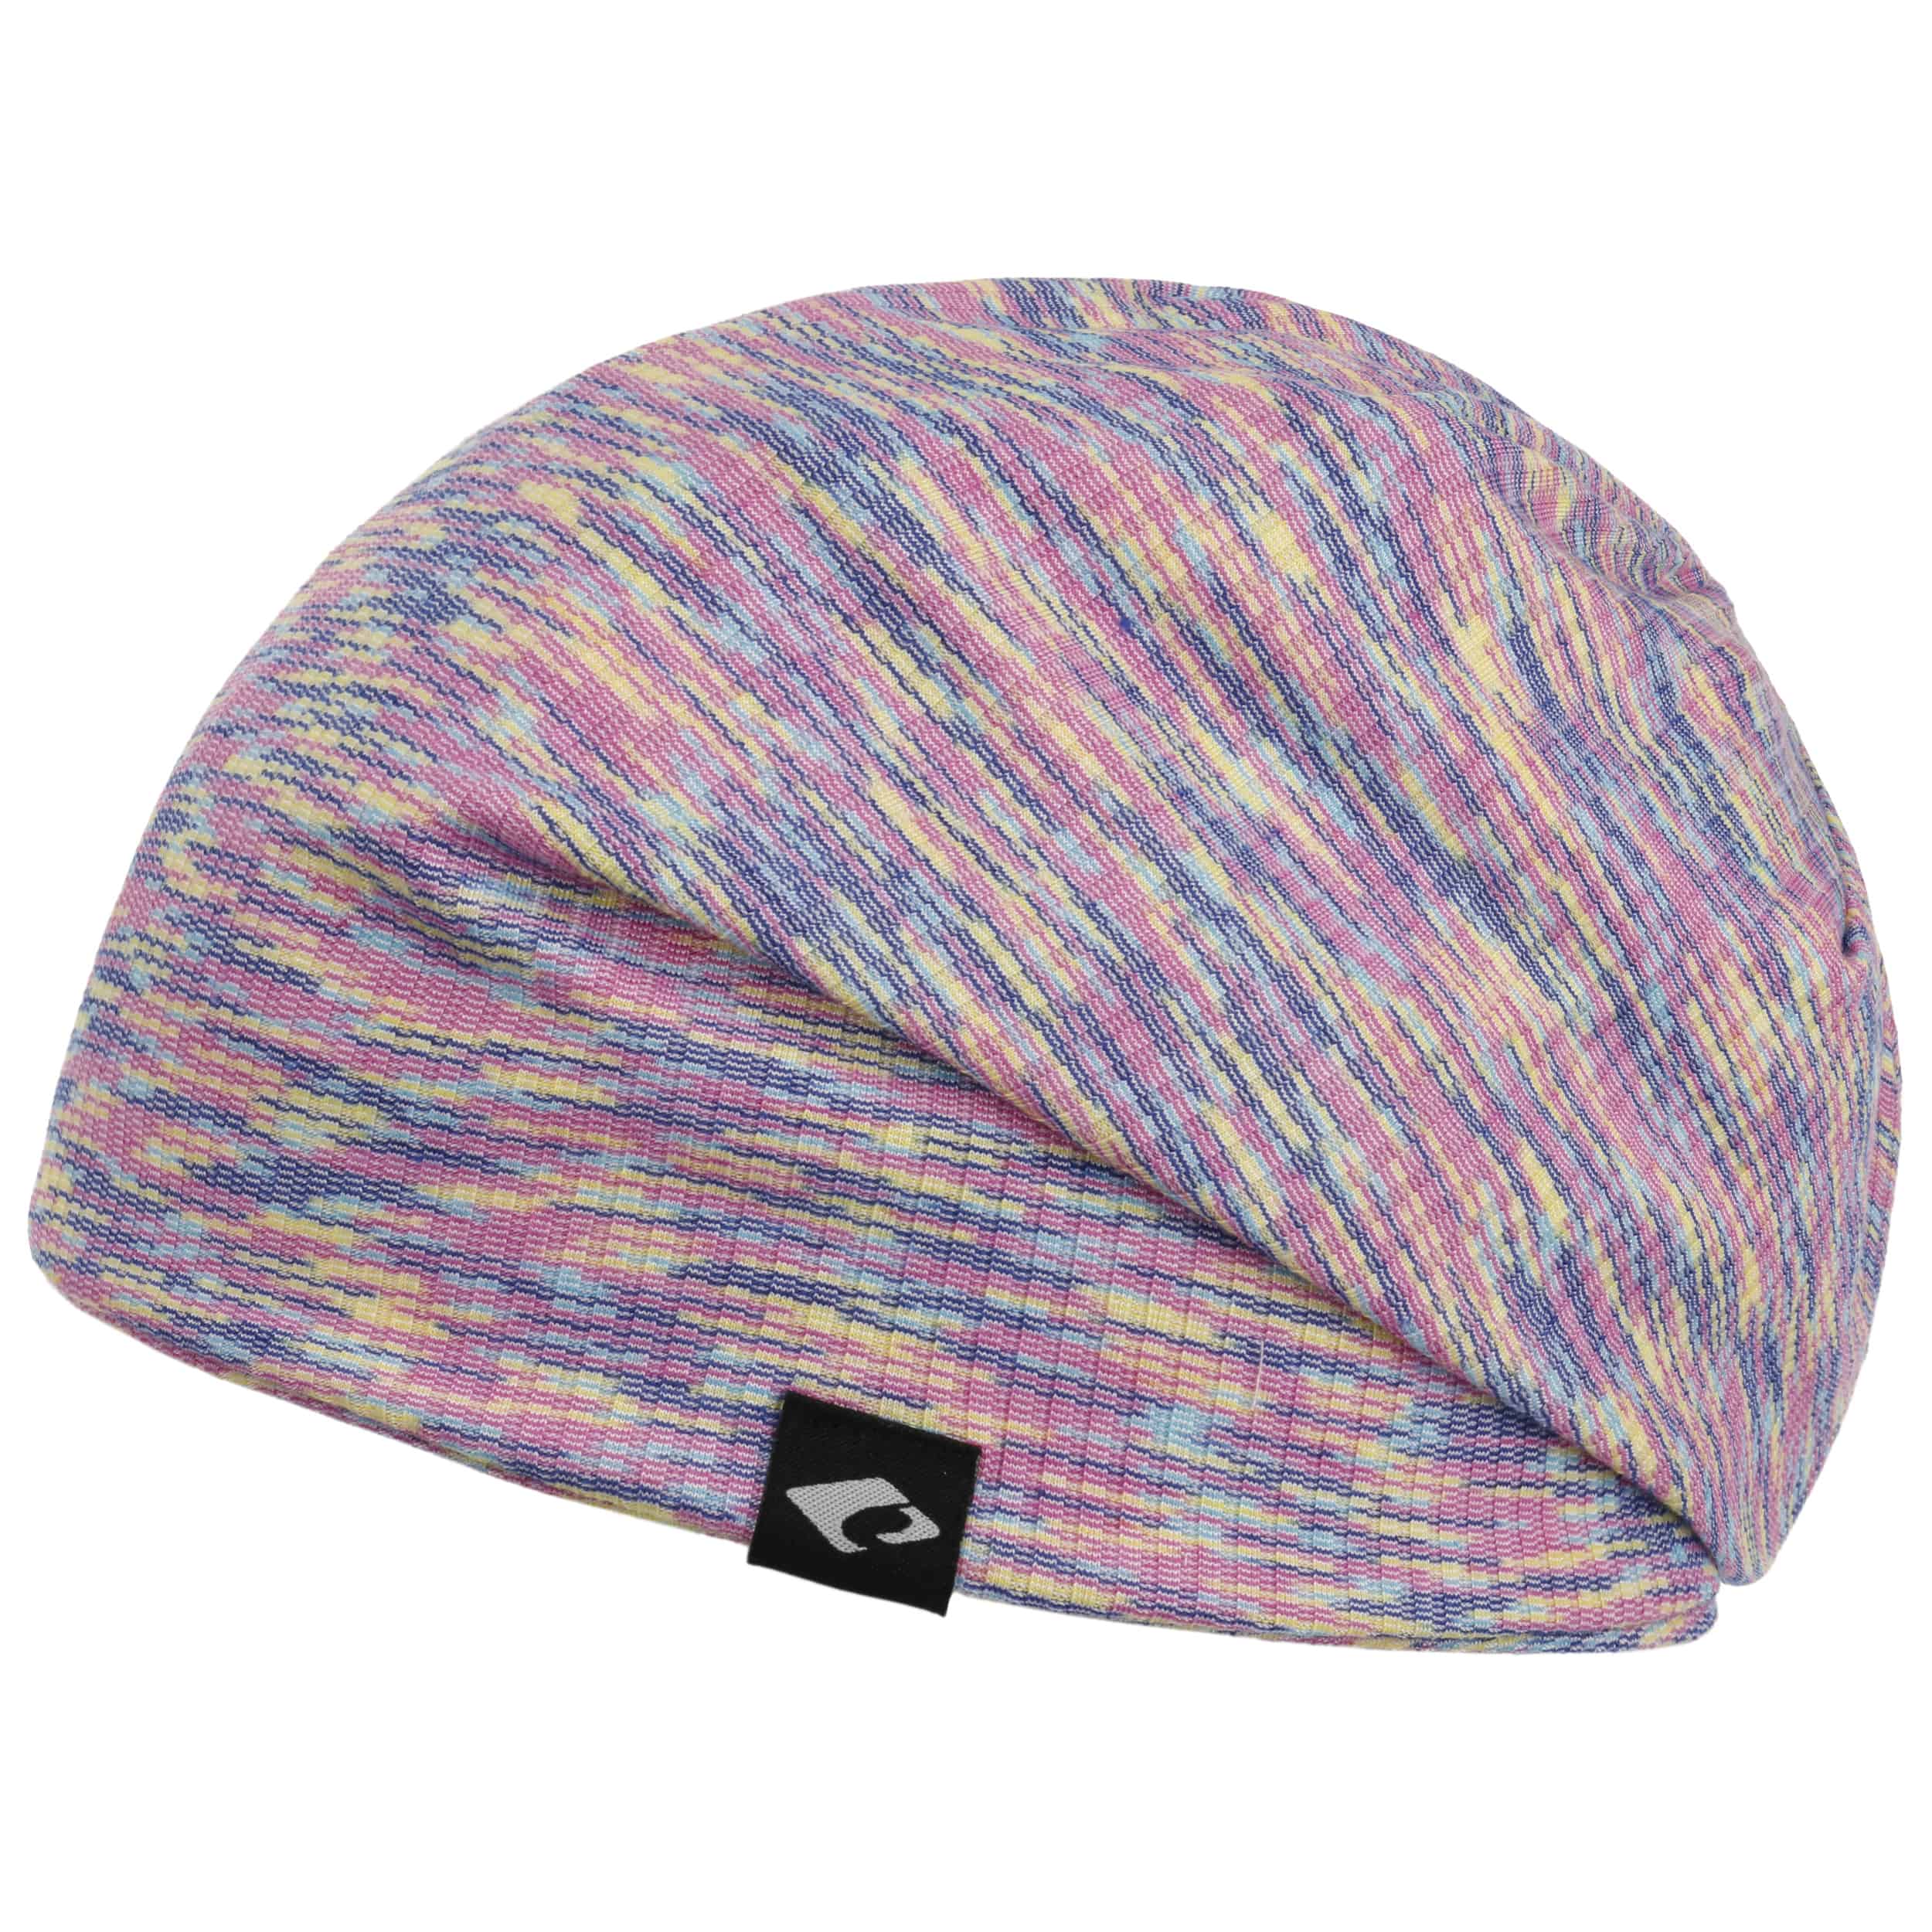 Beanie 25,95 by - Chillouts CHF Kanpur